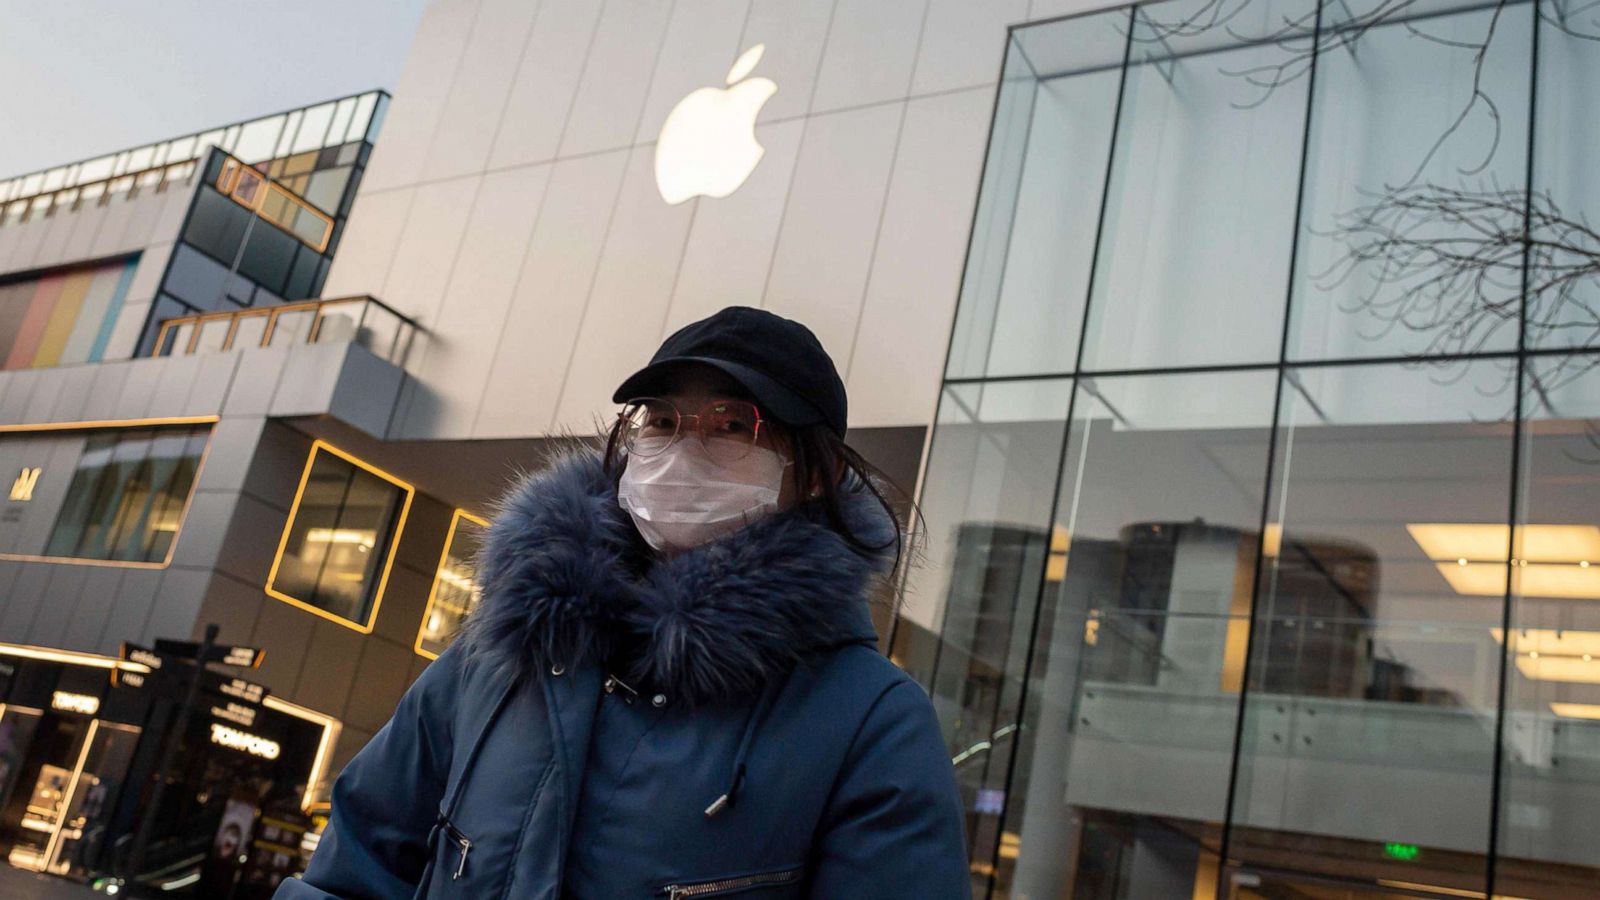 Apple temporarily closing all stores, offices in China amid coronavirus outbreak